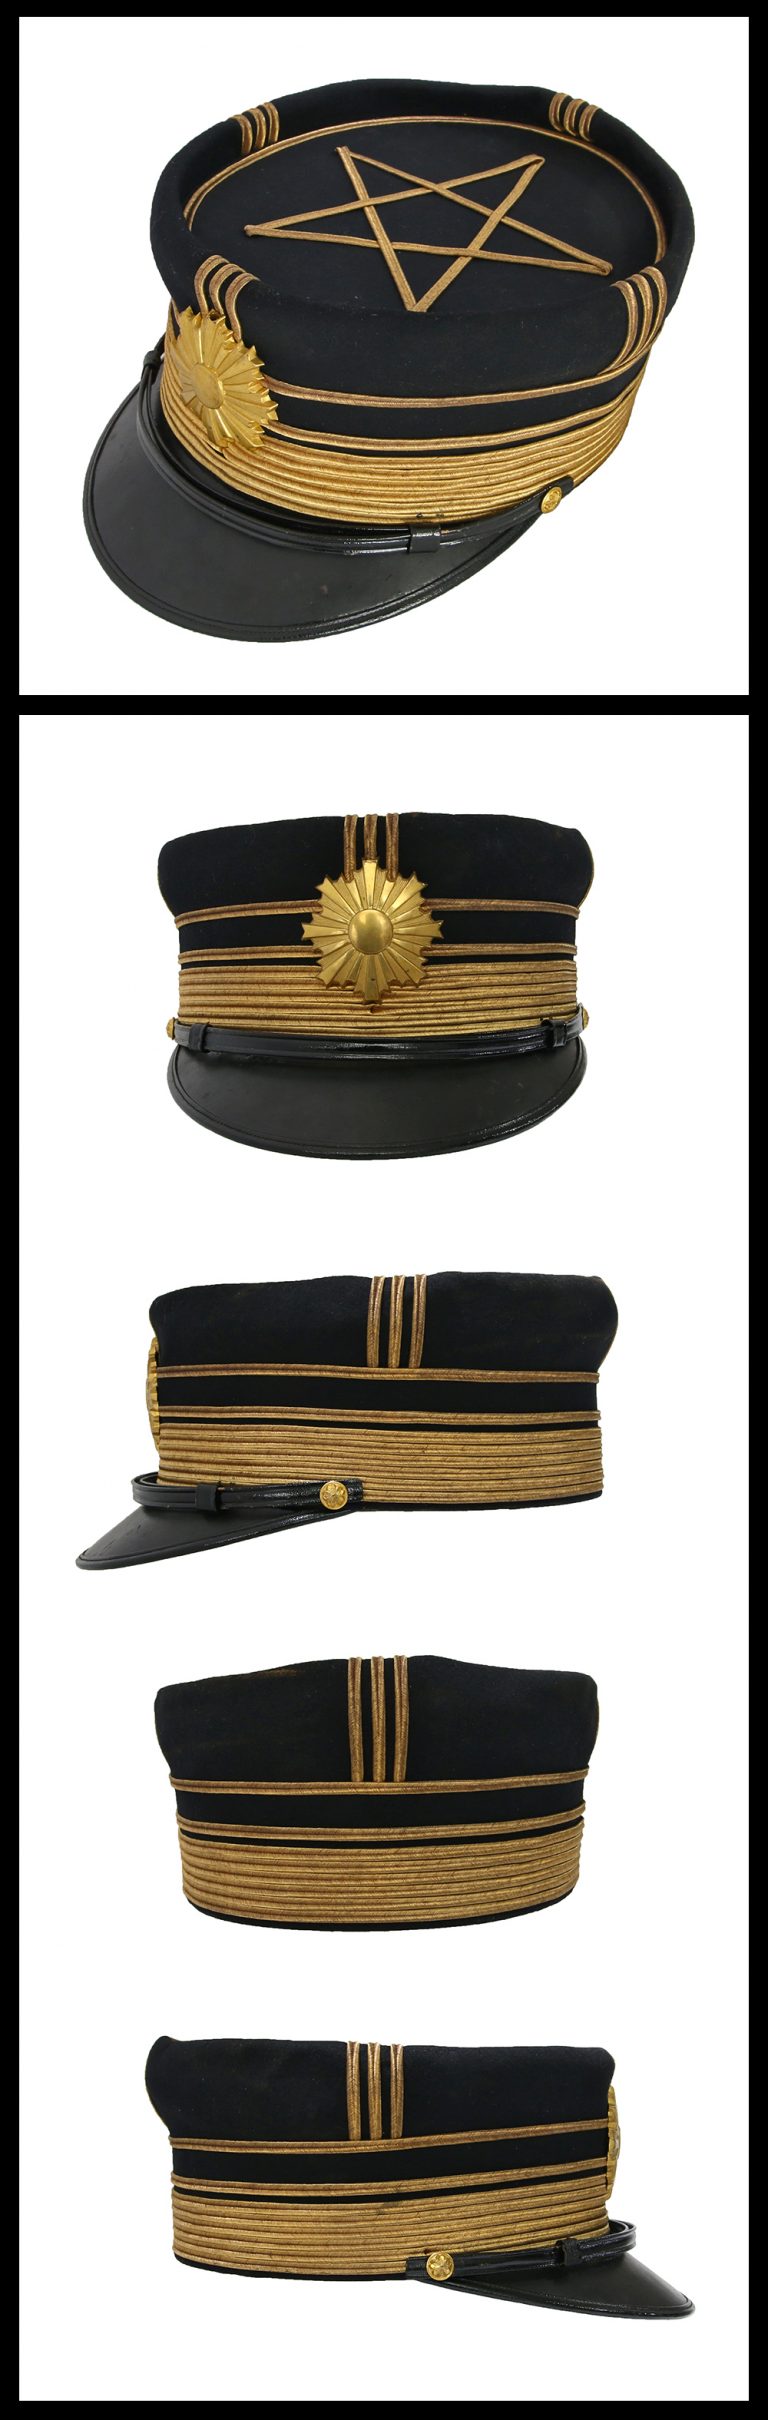 Hat, epaulet, decoration and aword certificate set